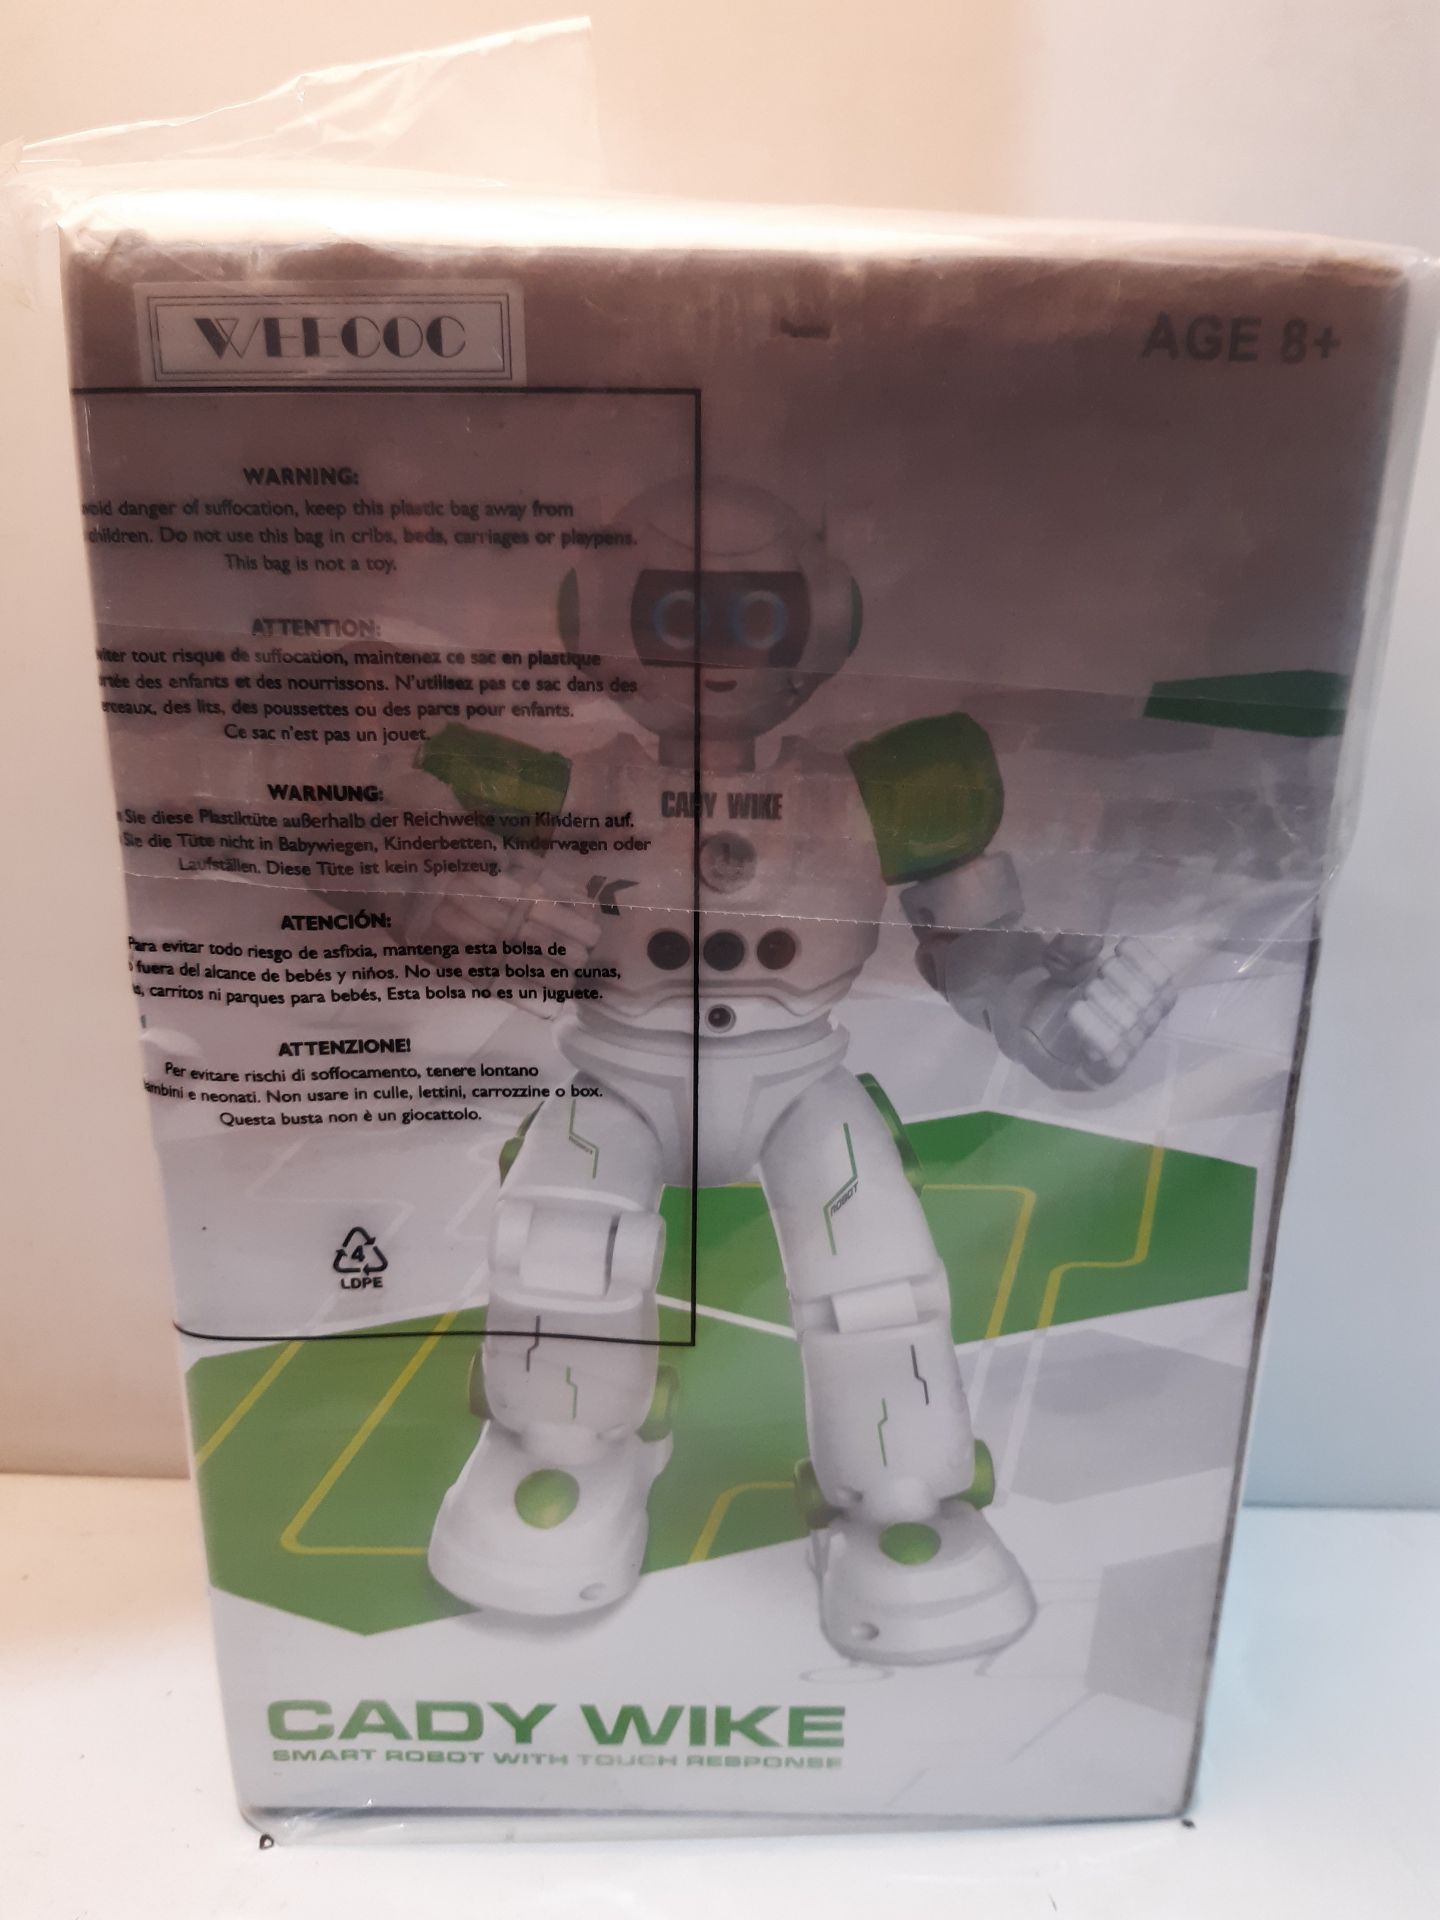 RRP £27.82 WEECOC RC Robot Toys Gesture Sensing Smart Robot Toy - Image 2 of 2